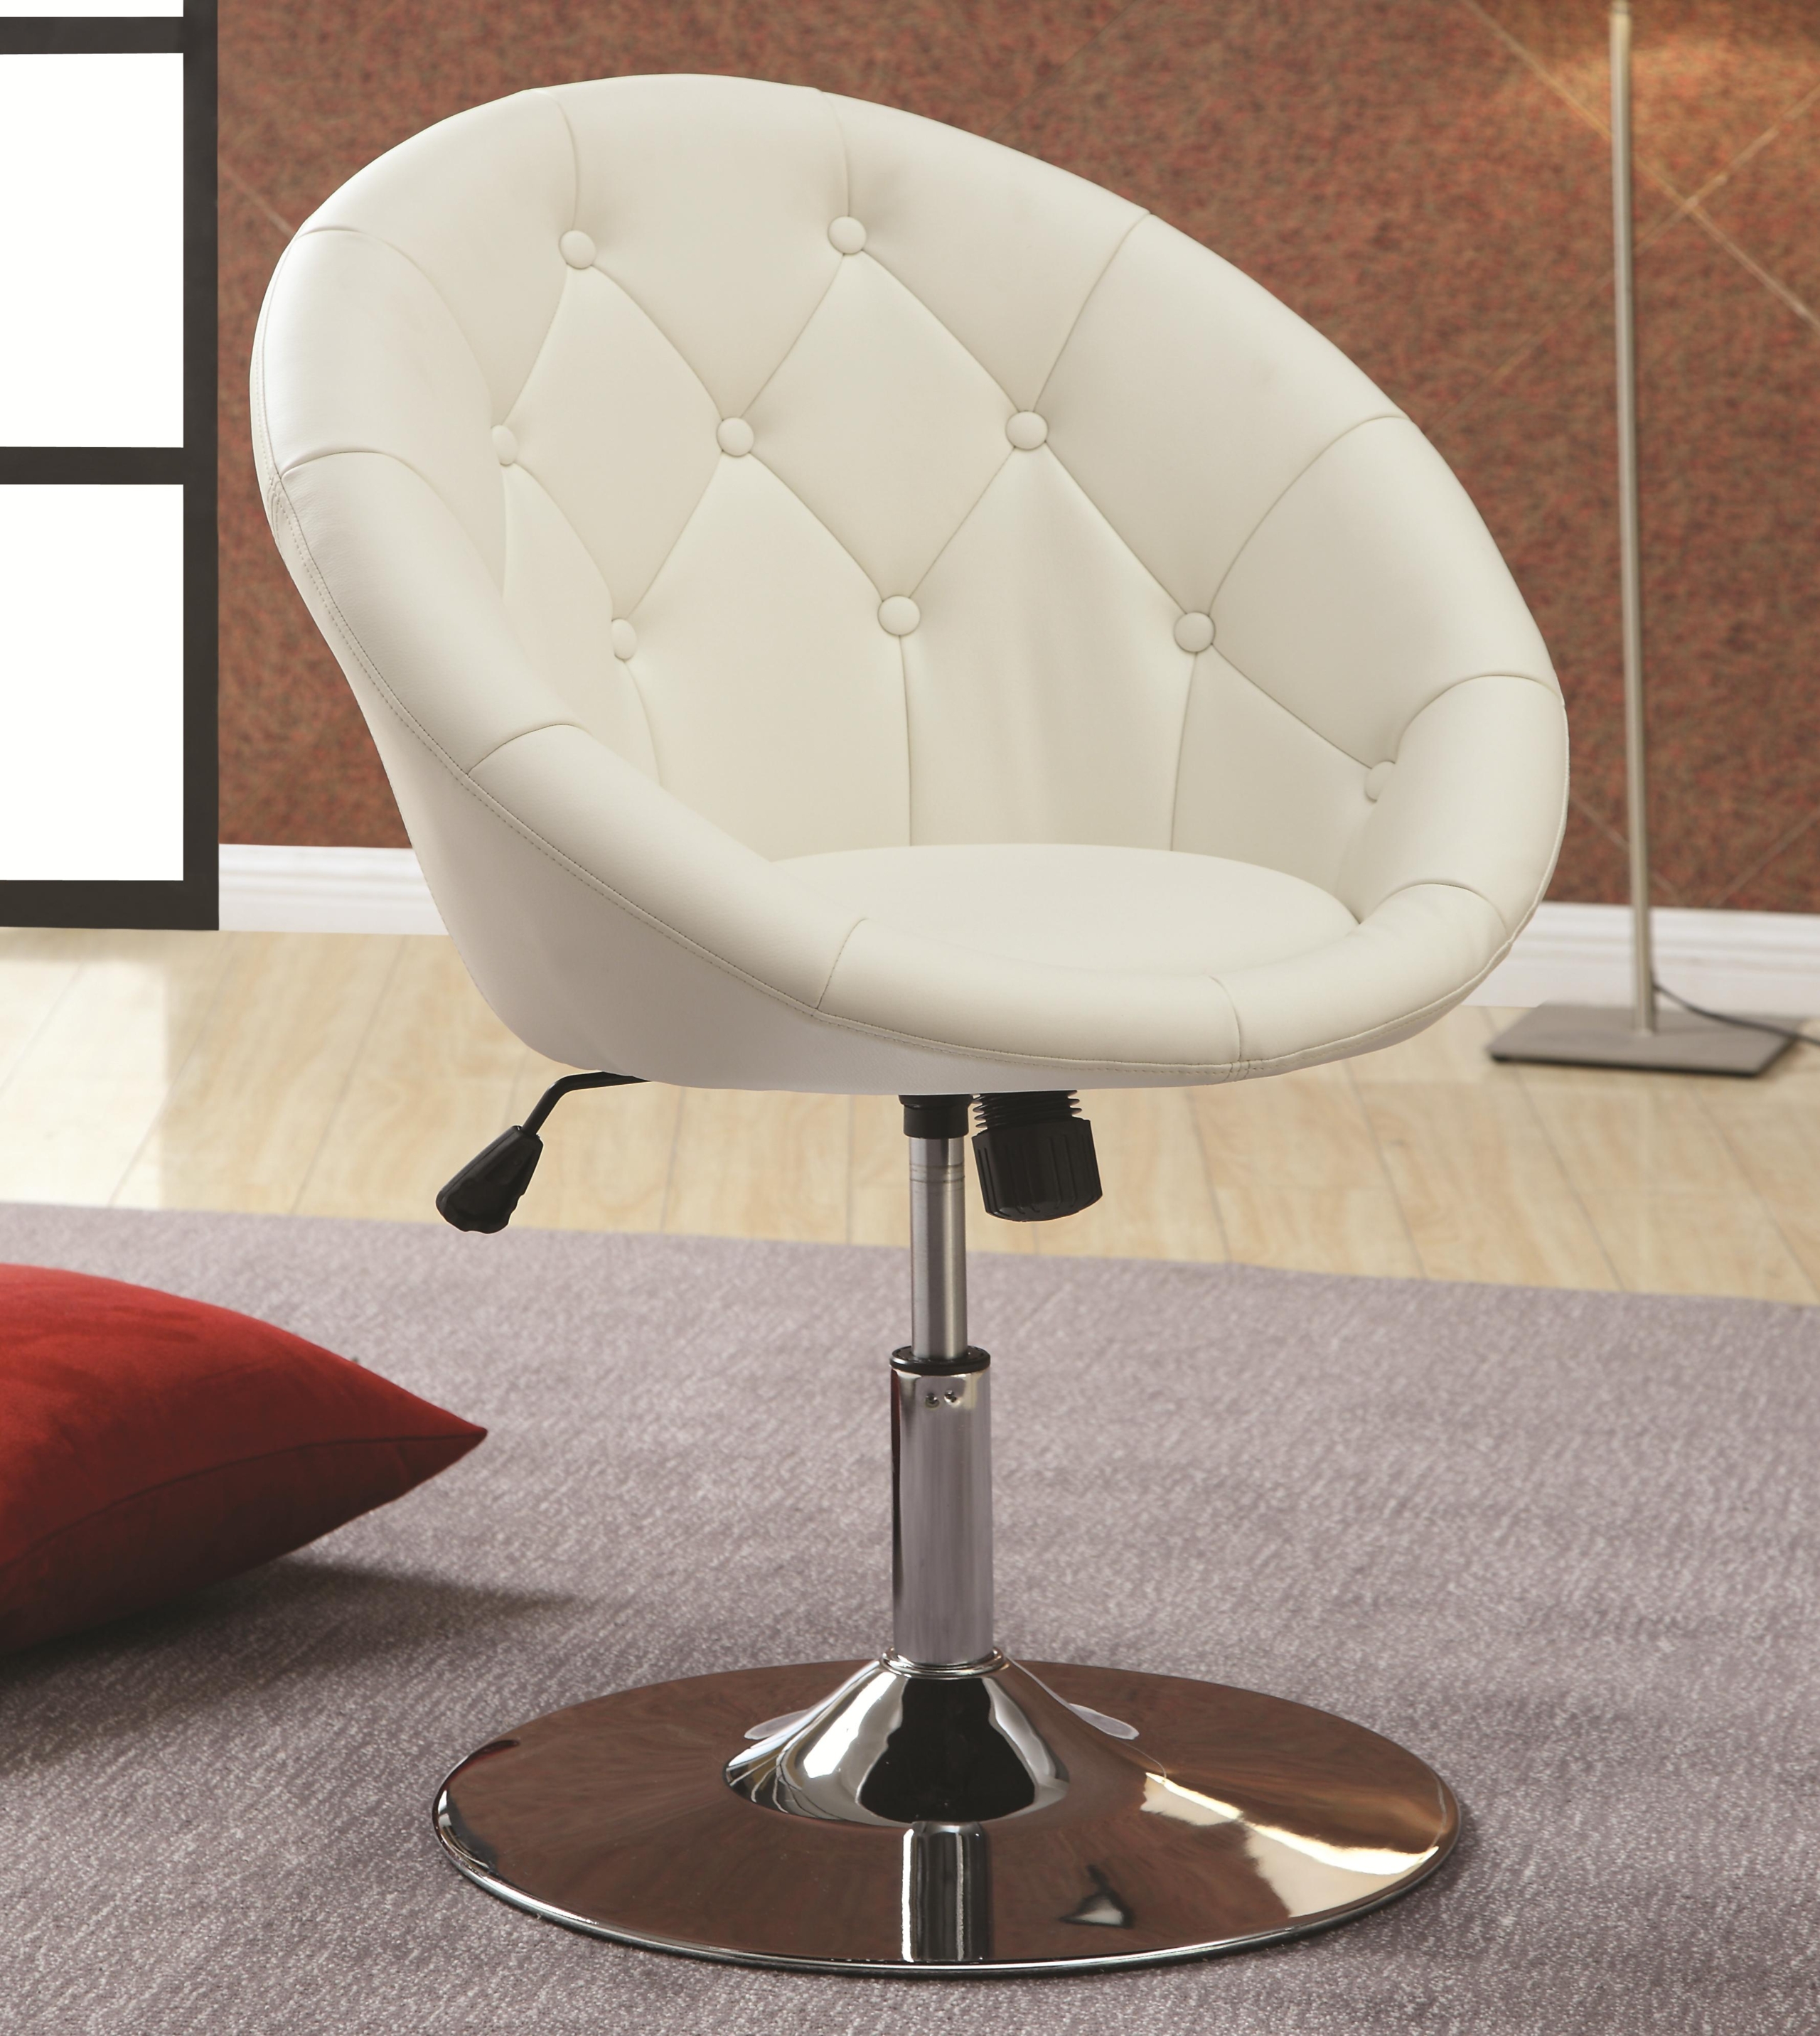 BTEXPERT® Round Back 360 Degree Swivel , Button Tufted & Tilt Tension Chair - White Hydraulic lift adjustable